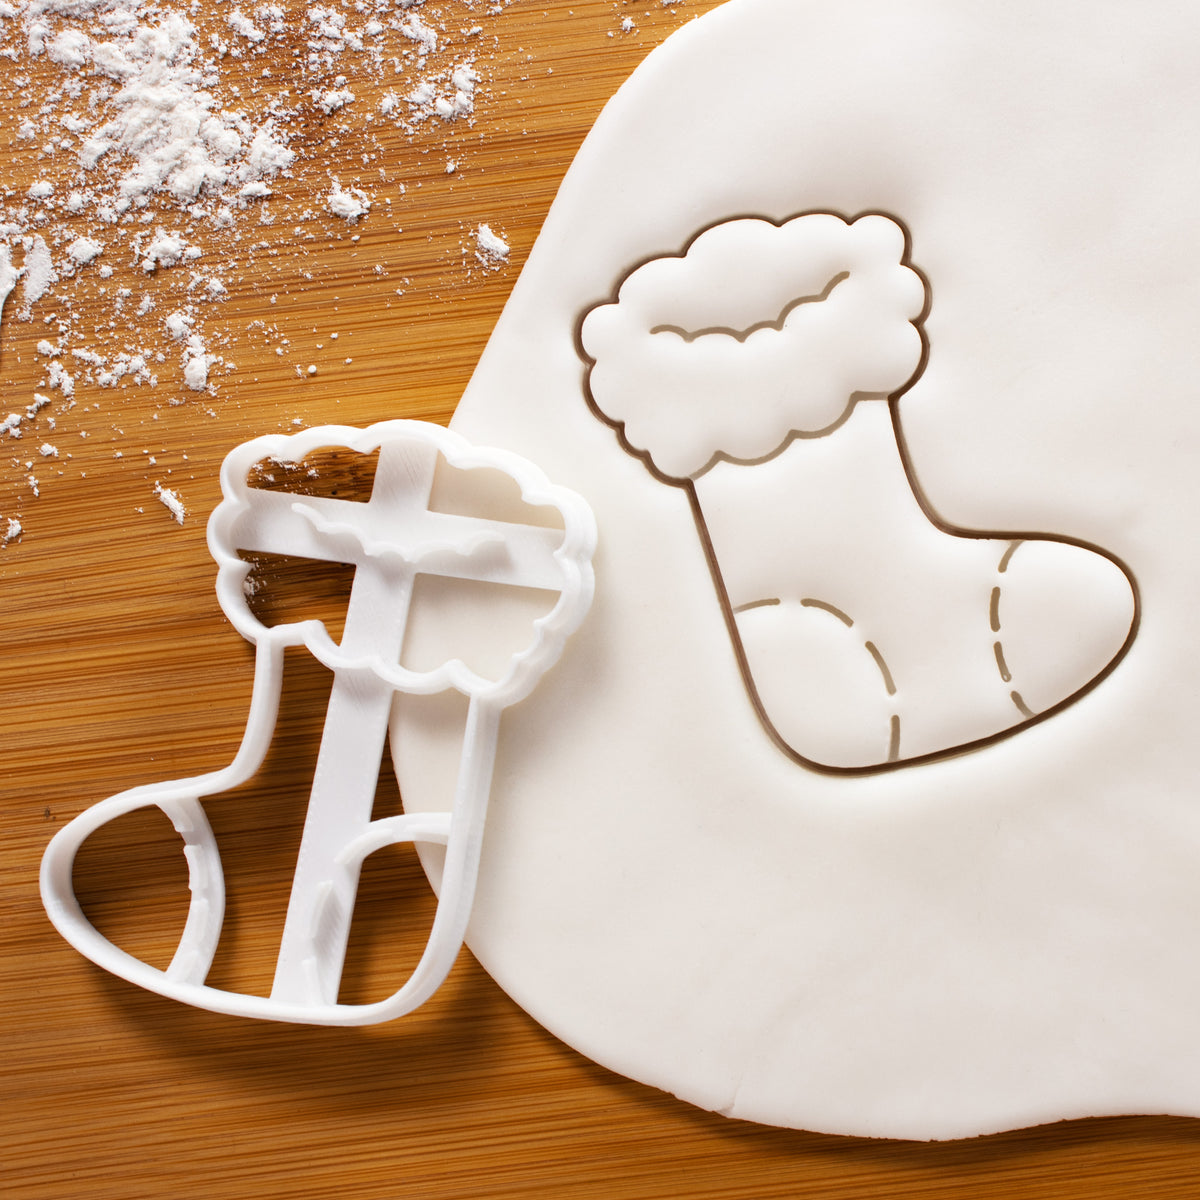 Christmas Stocking Cookie Cutter pressed on white fondant